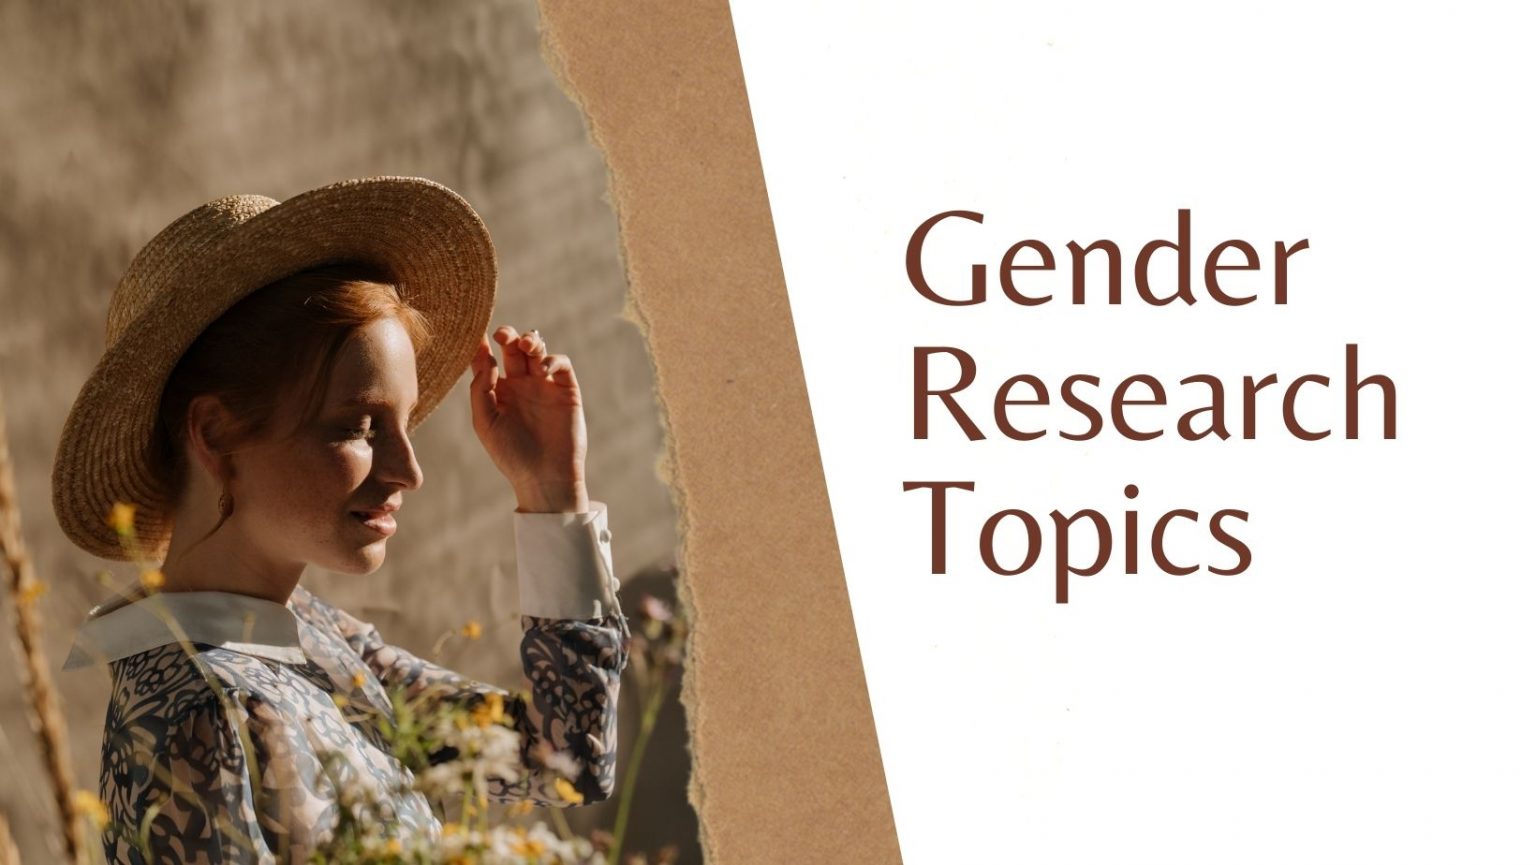 research topics on gender norms